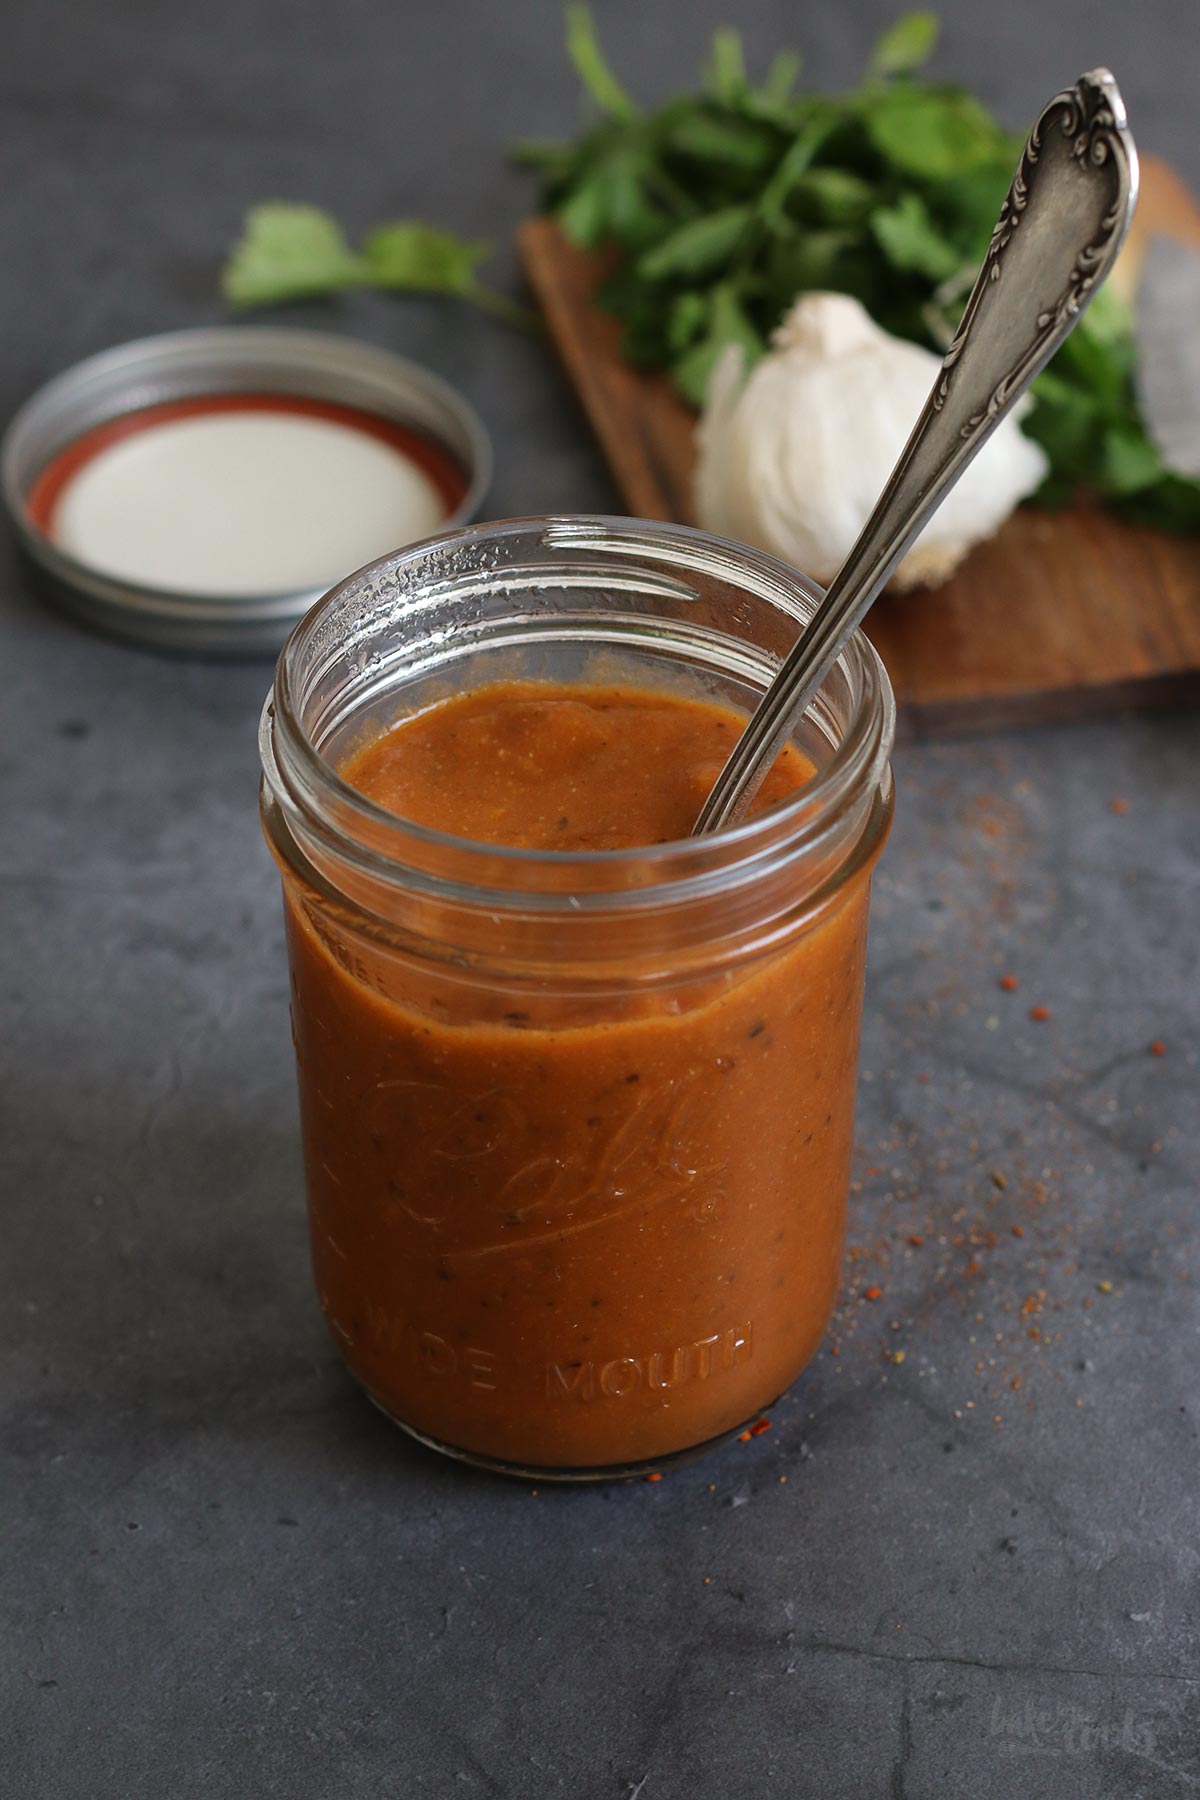 Homemade Enchilada Sauce | Bake to the roots